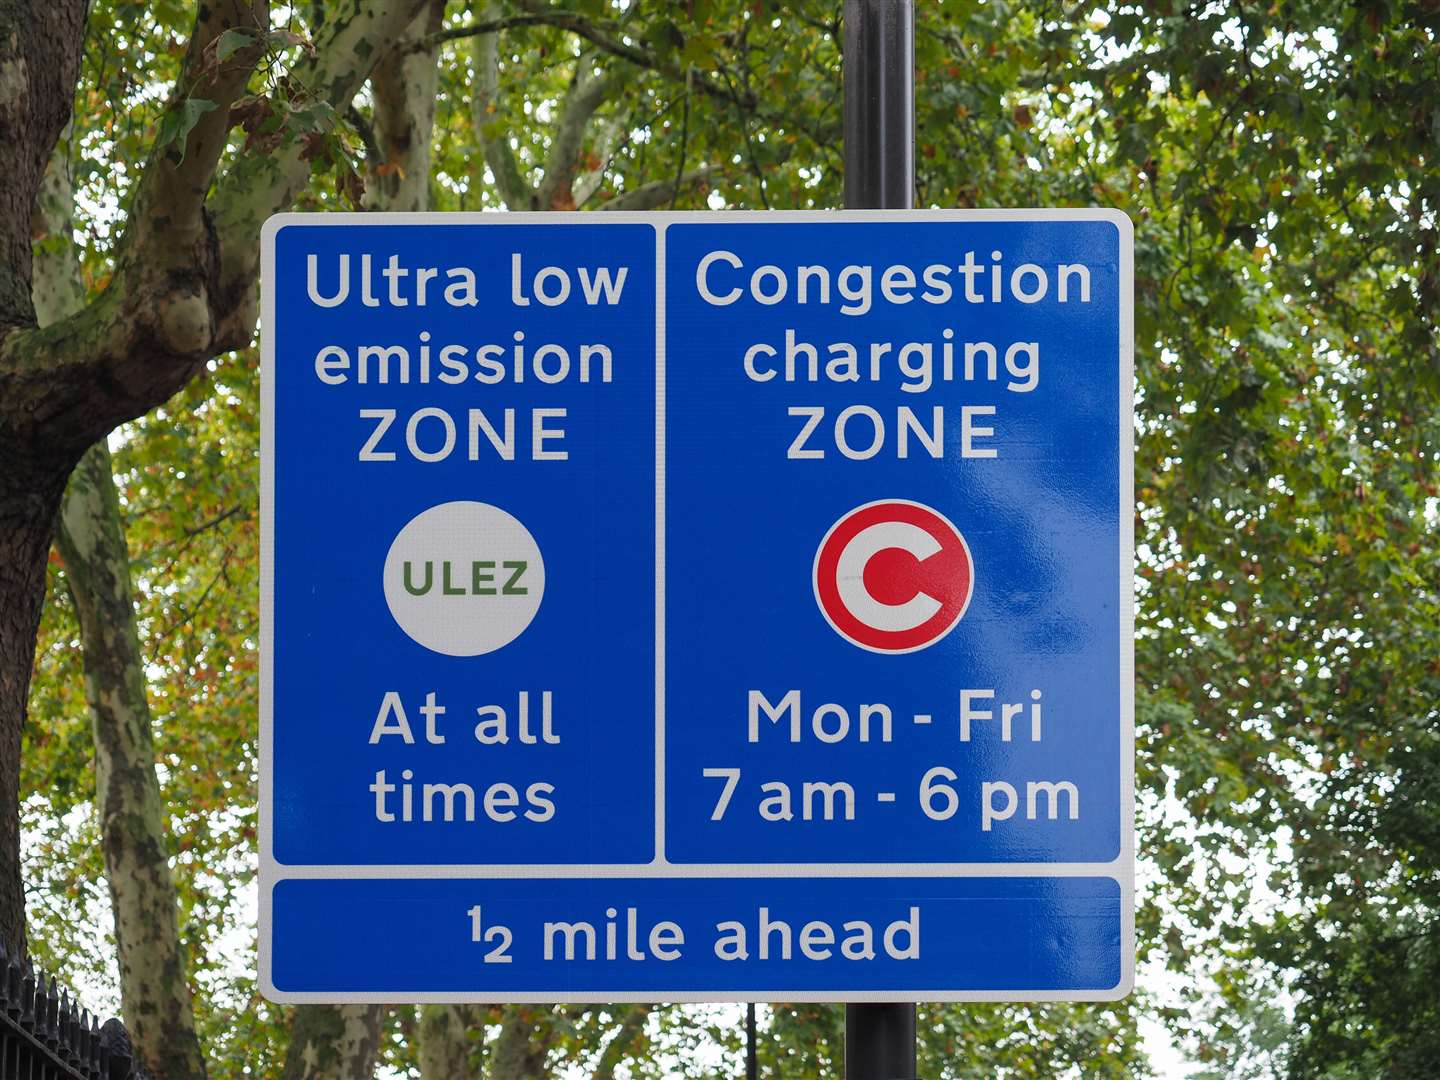 The Ultra low emission zone is in operation at all times and could soon be expanded to the border between Kent and greater London.